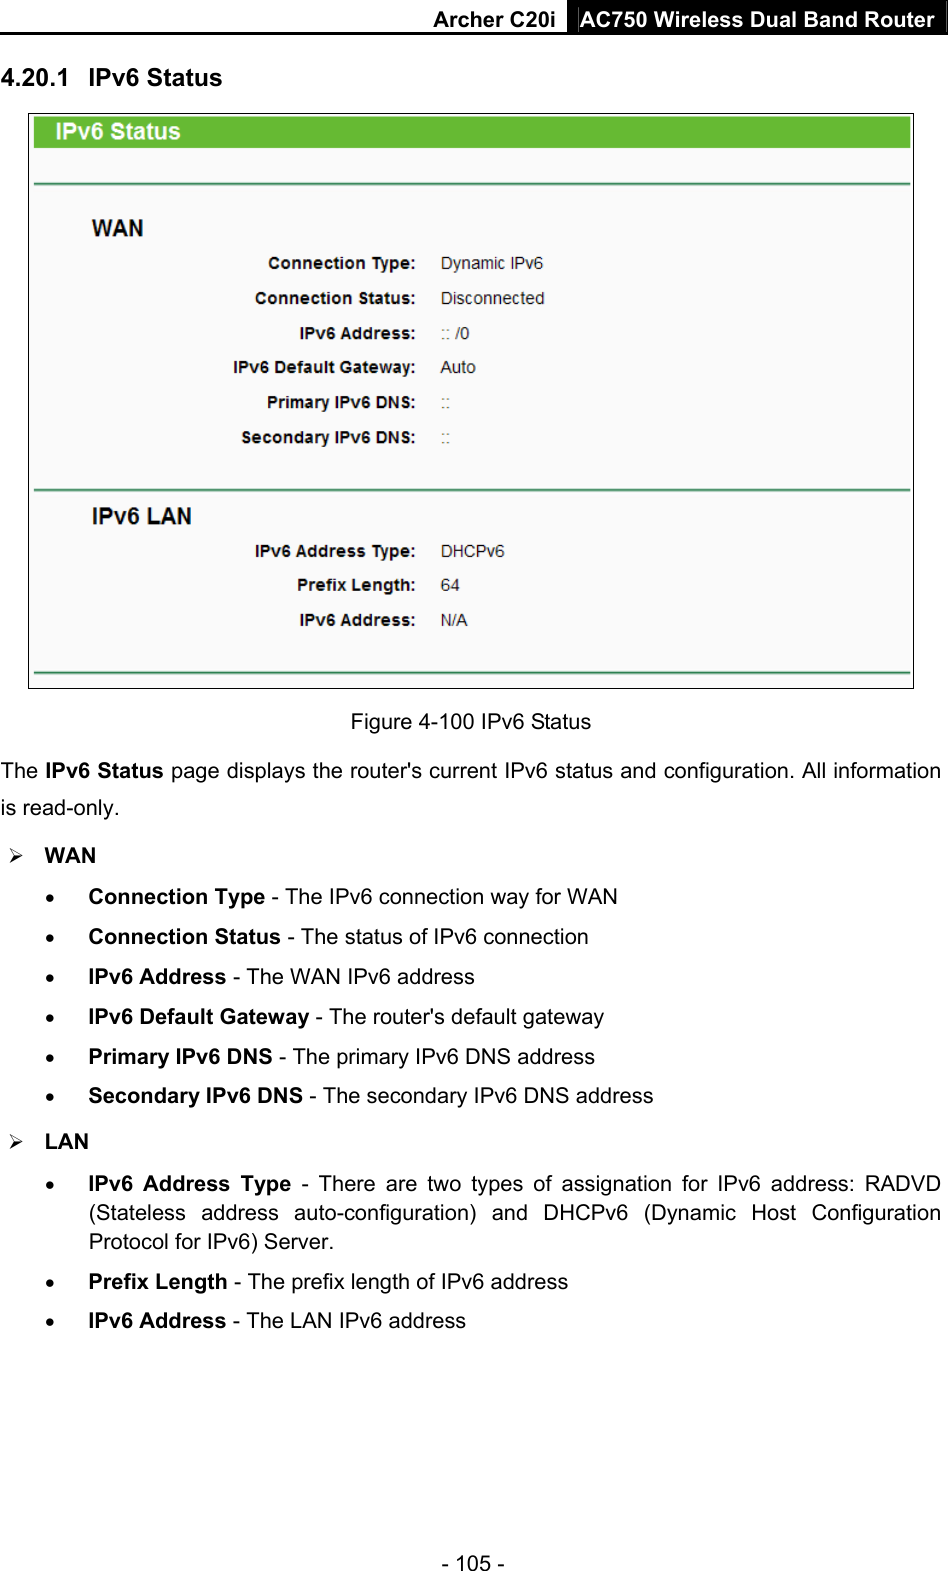 Archer C20i AC750 Wireless Dual Band Router - 105 - 4.20.1  IPv6 Status  Figure 4-100 IPv6 Status The IPv6 Status page displays the router&apos;s current IPv6 status and configuration. All information is read-only.   ¾ WAN   • Connection Type - The IPv6 connection way for WAN • Connection Status - The status of IPv6 connection • IPv6 Address - The WAN IPv6 address • IPv6 Default Gateway - The router&apos;s default gateway • Primary IPv6 DNS - The primary IPv6 DNS address • Secondary IPv6 DNS - The secondary IPv6 DNS address ¾ LAN • IPv6 Address Type - There are two types of assignation for IPv6 address: RADVD (Stateless address auto-configuration) and DHCPv6 (Dynamic Host Configuration Protocol for IPv6) Server. • Prefix Length - The prefix length of IPv6 address • IPv6 Address - The LAN IPv6 address 